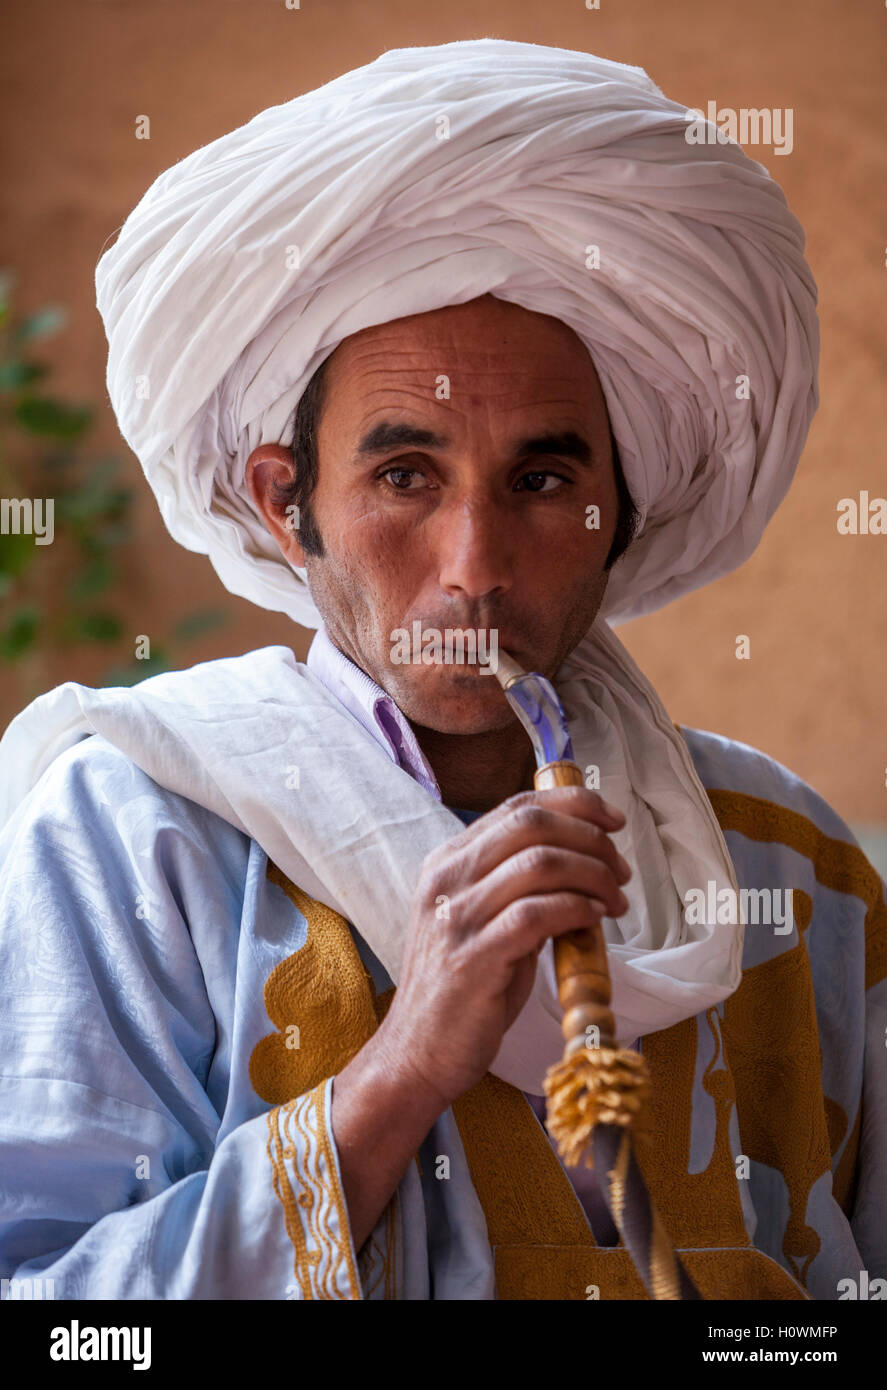 Near Ait Oudinar, Dades Gorge, Morocco.  Young Berber Man Smoking a Water Pipe. Stock Photo